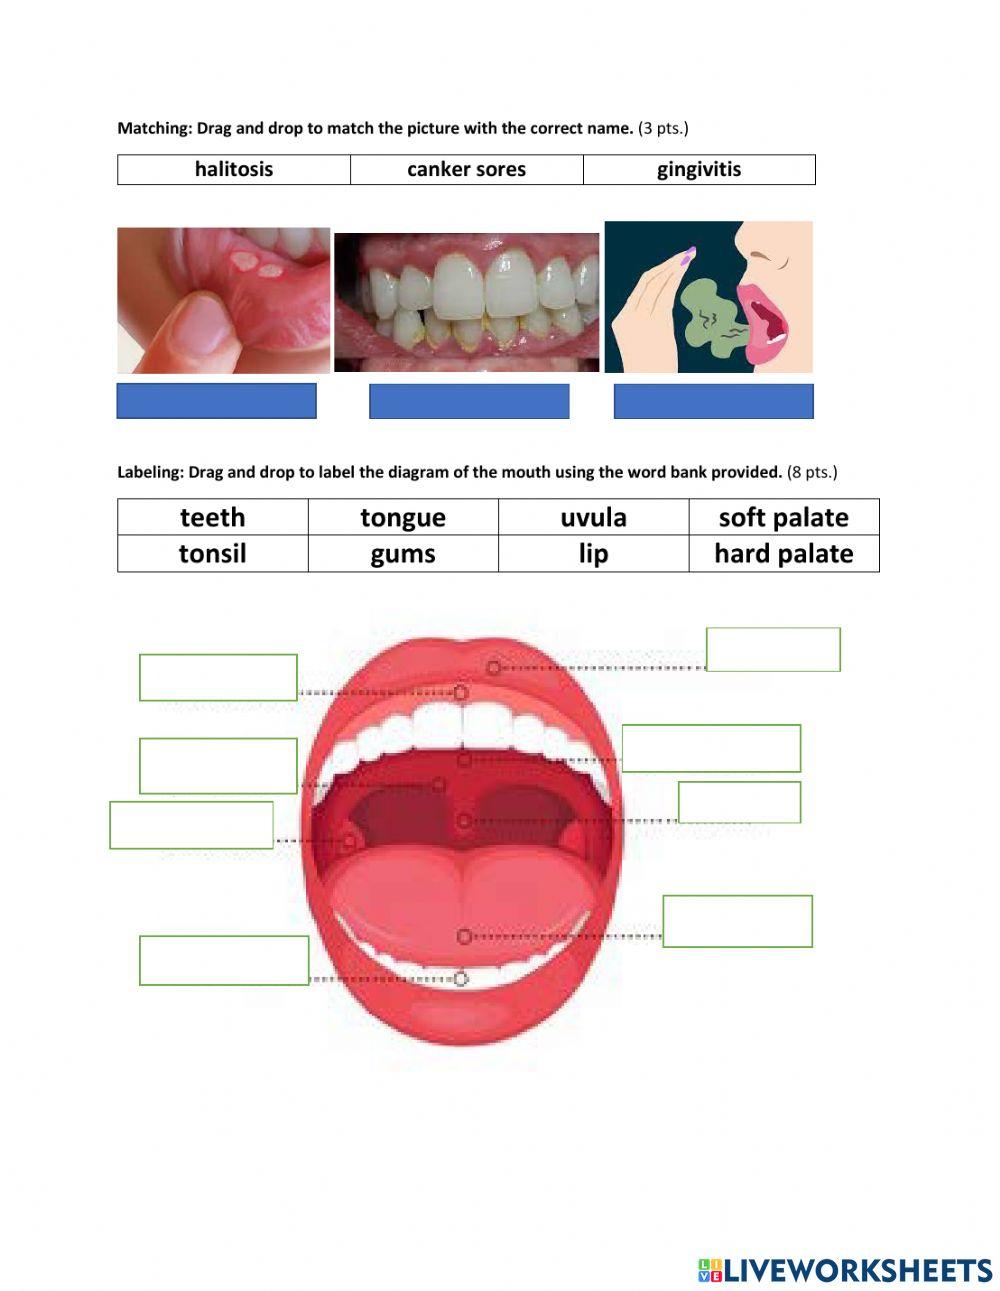 Oral Hygiene, Cavities, Diseases that affect the mouth